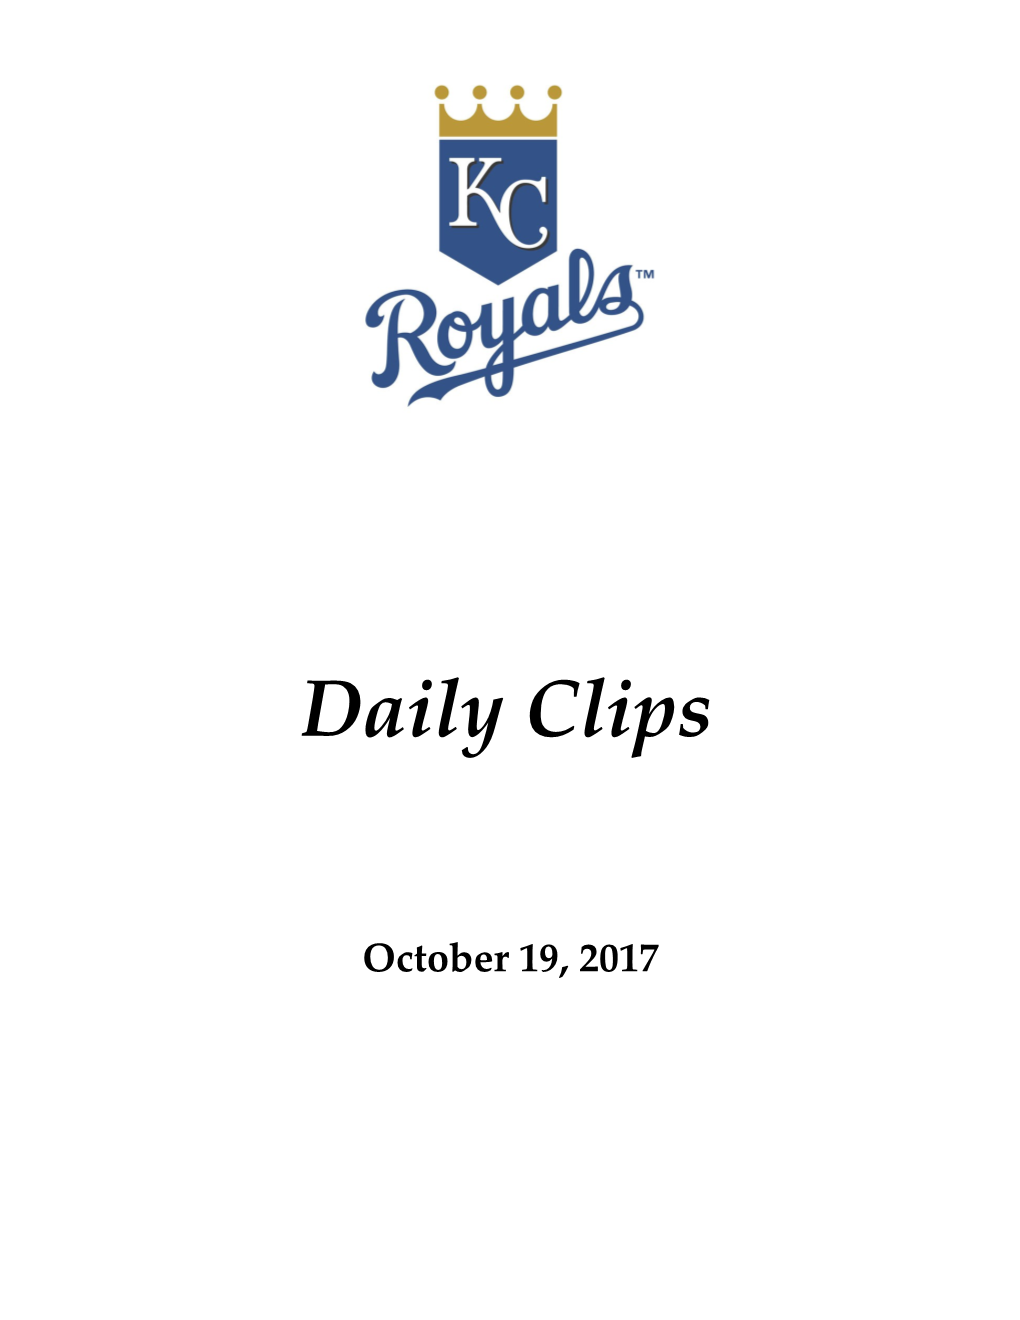 Moore Reiterates His Commitment to Royals